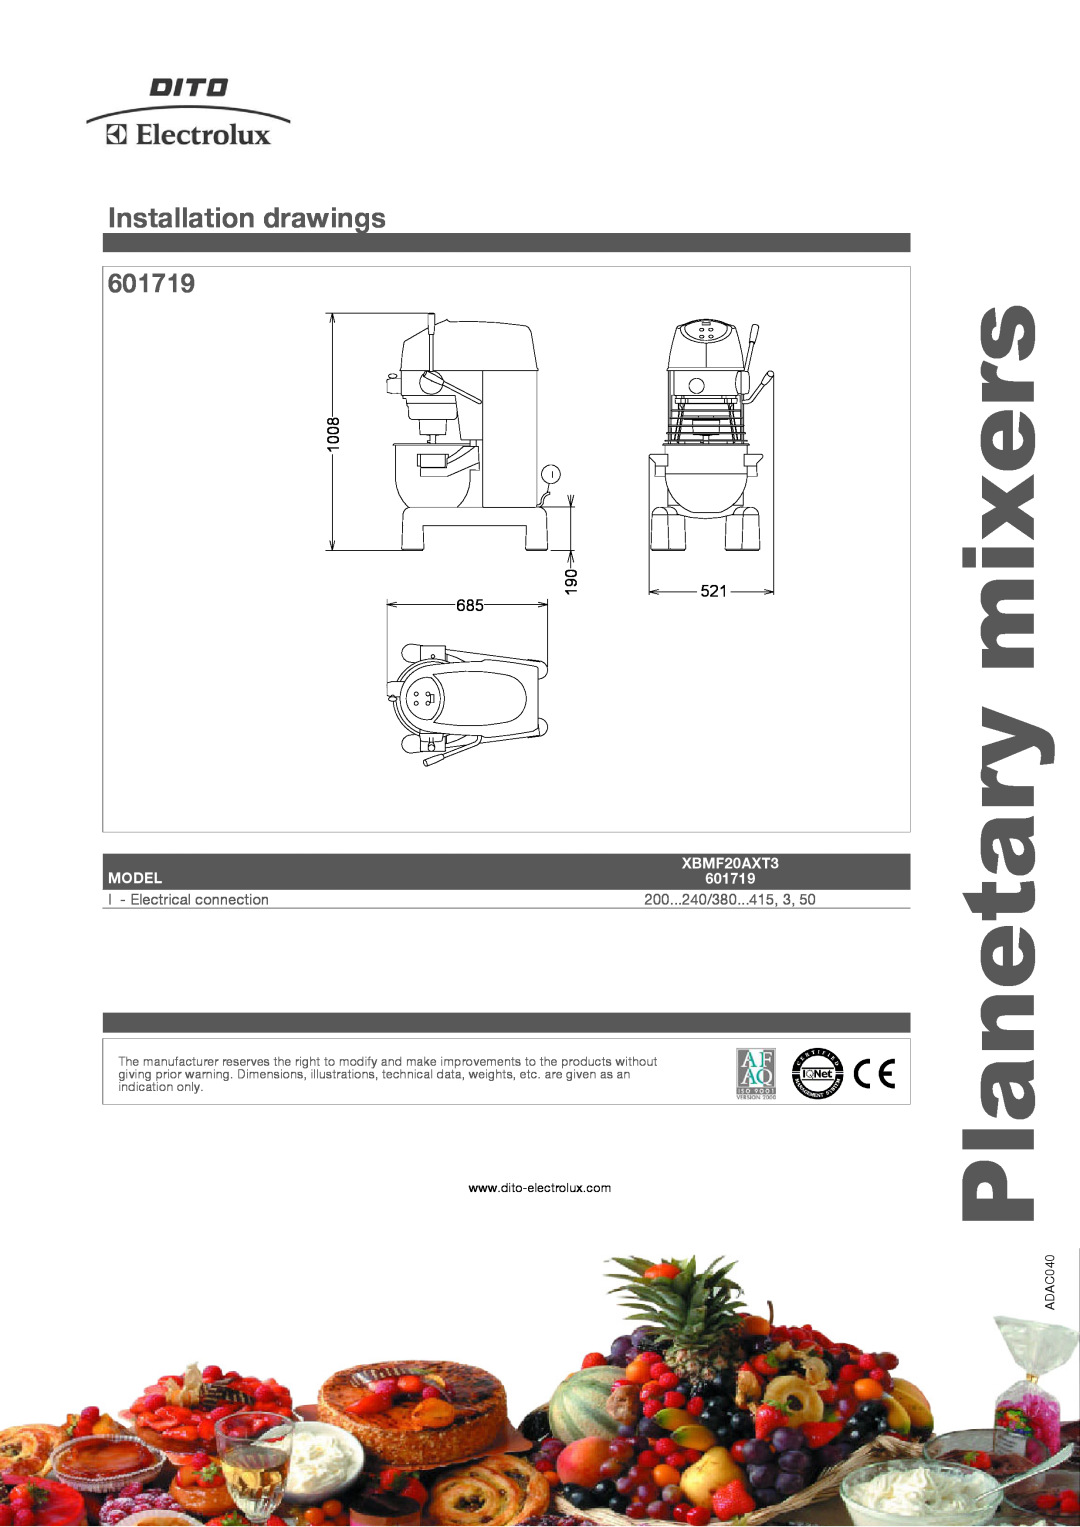 Electrolux XBMF20AXT3 Installation drawings, 601719, Planetary mixers, 1008, Model, I - Electrical connection, ADAC040 